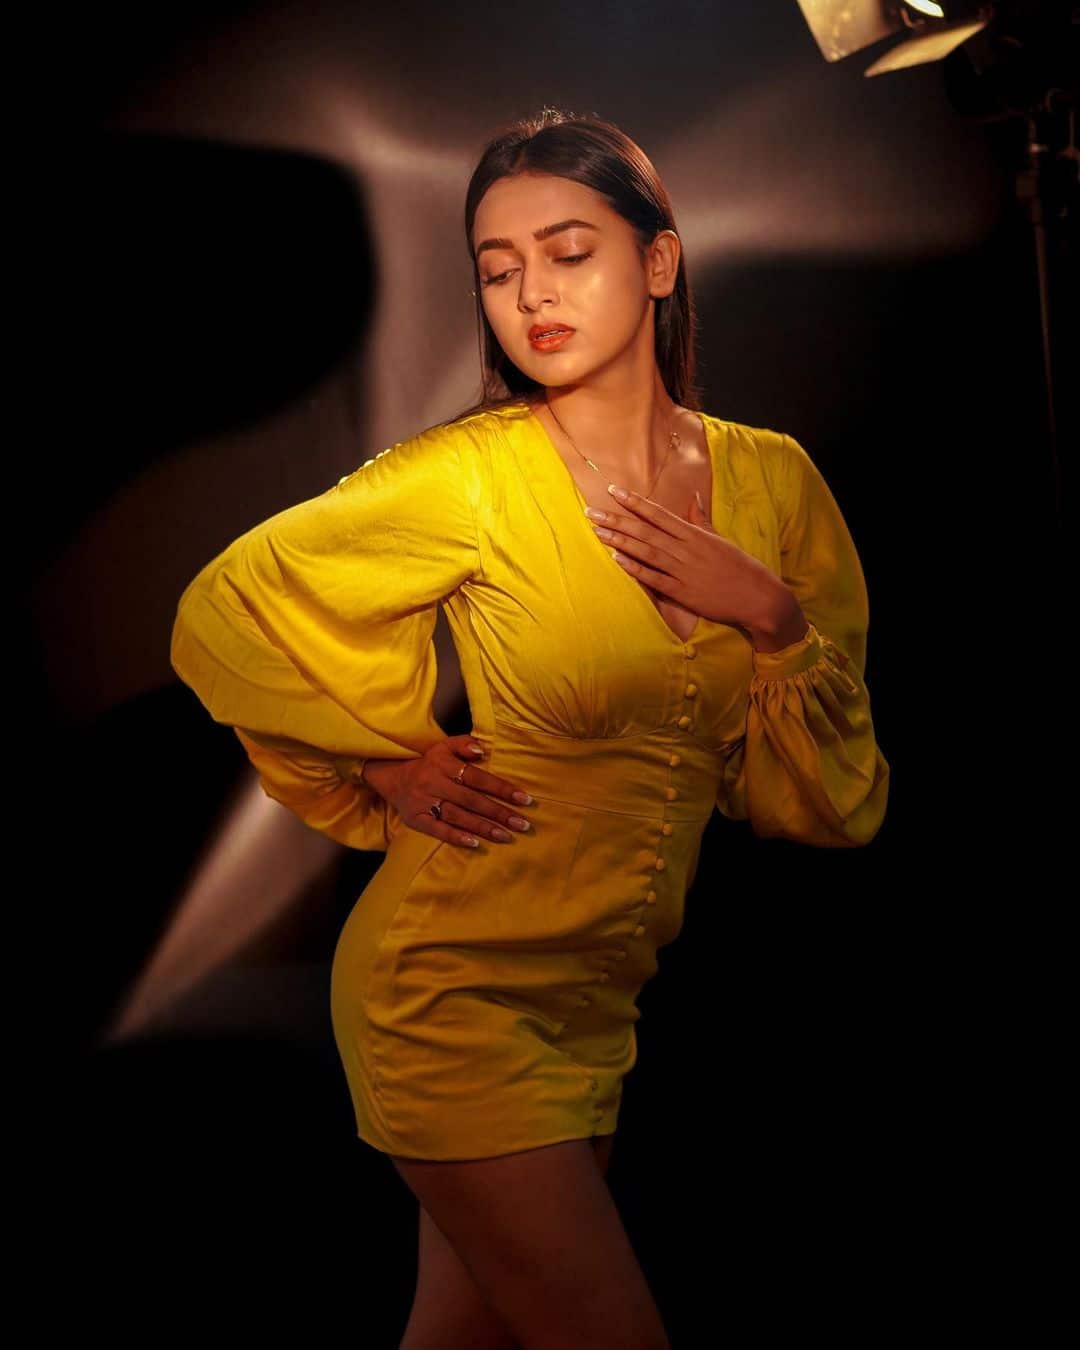 Tejasswi gives killer expressions in yellow short dress